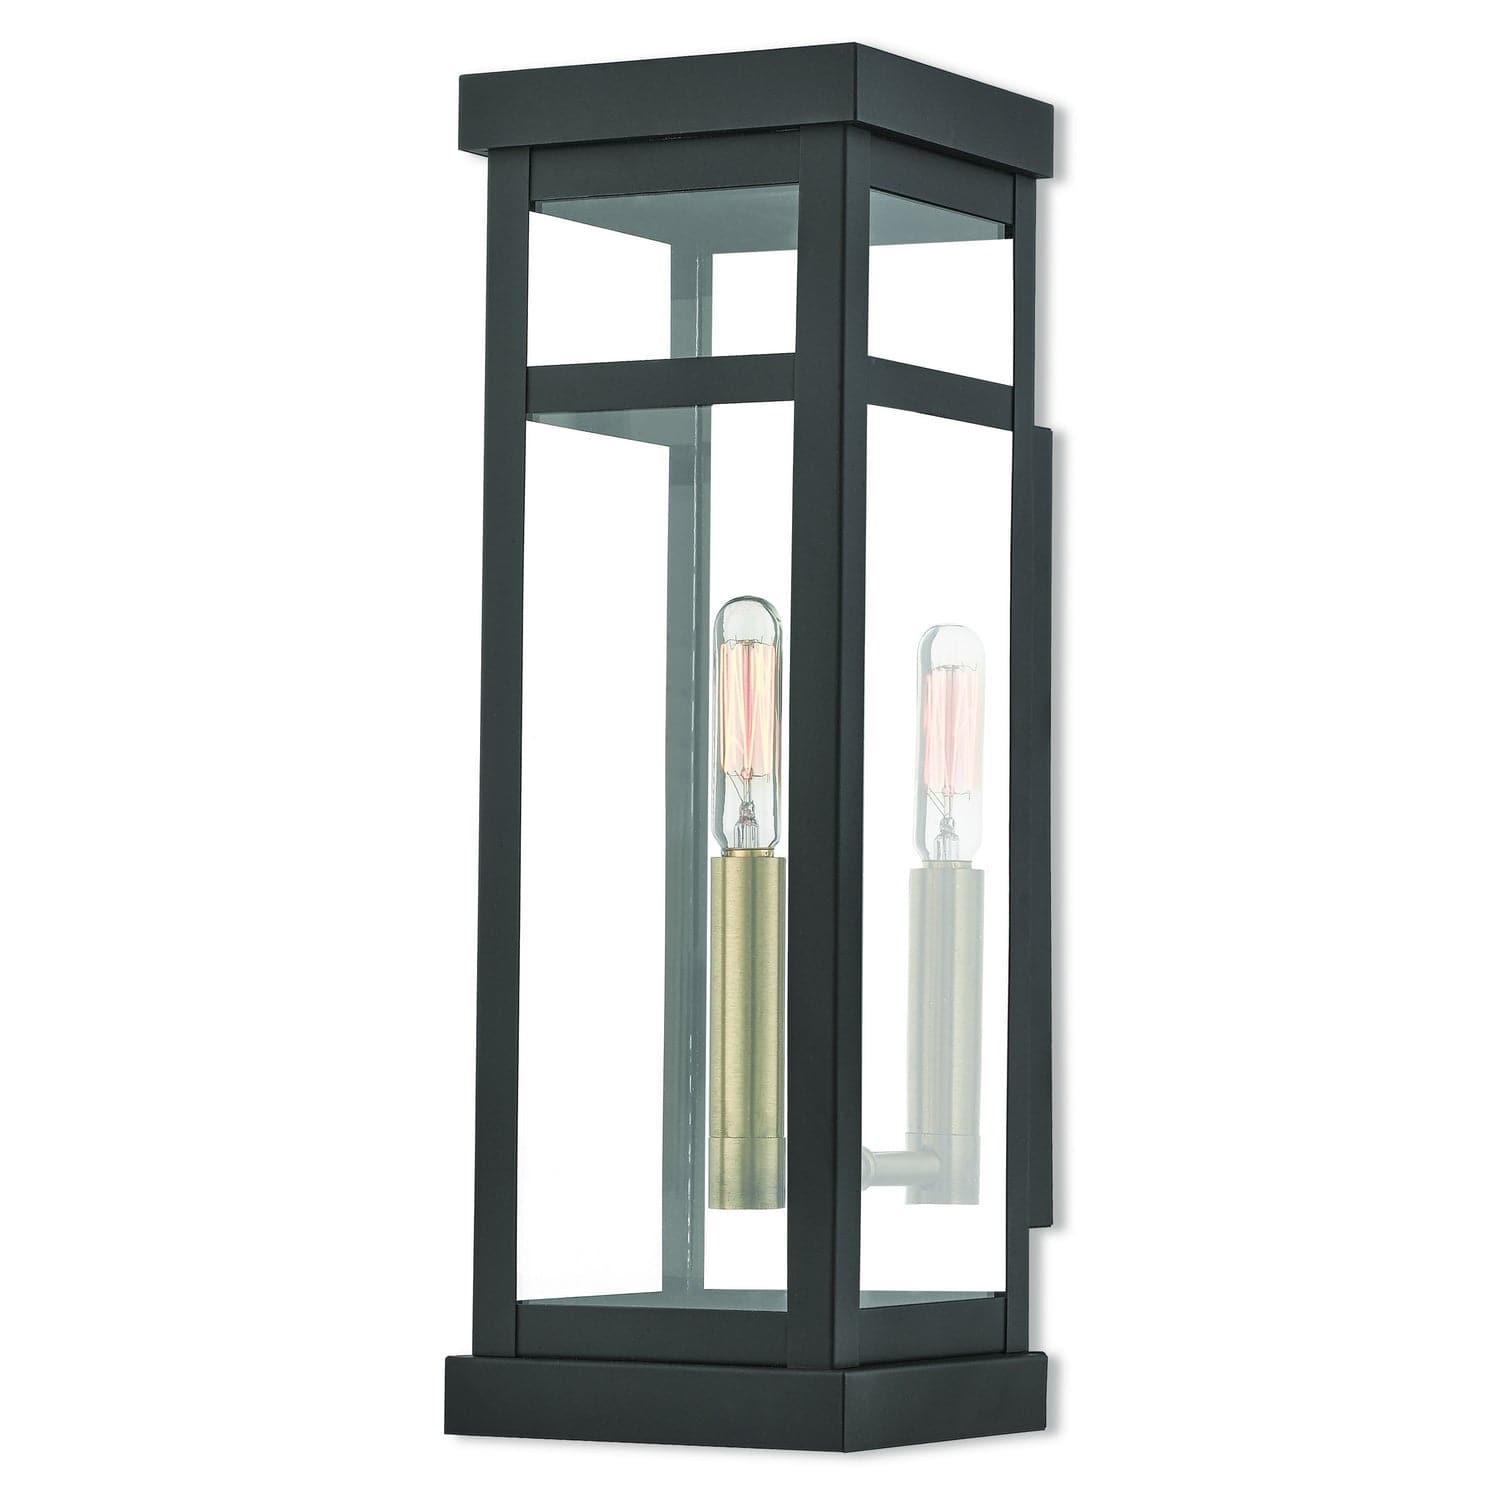 Livex Lighting - 20703-07 - One Light Outdoor Wall Lantern - Hopewell - Bronze w/ Antique Brass Cluster and Polished Chrome Stainless Steel